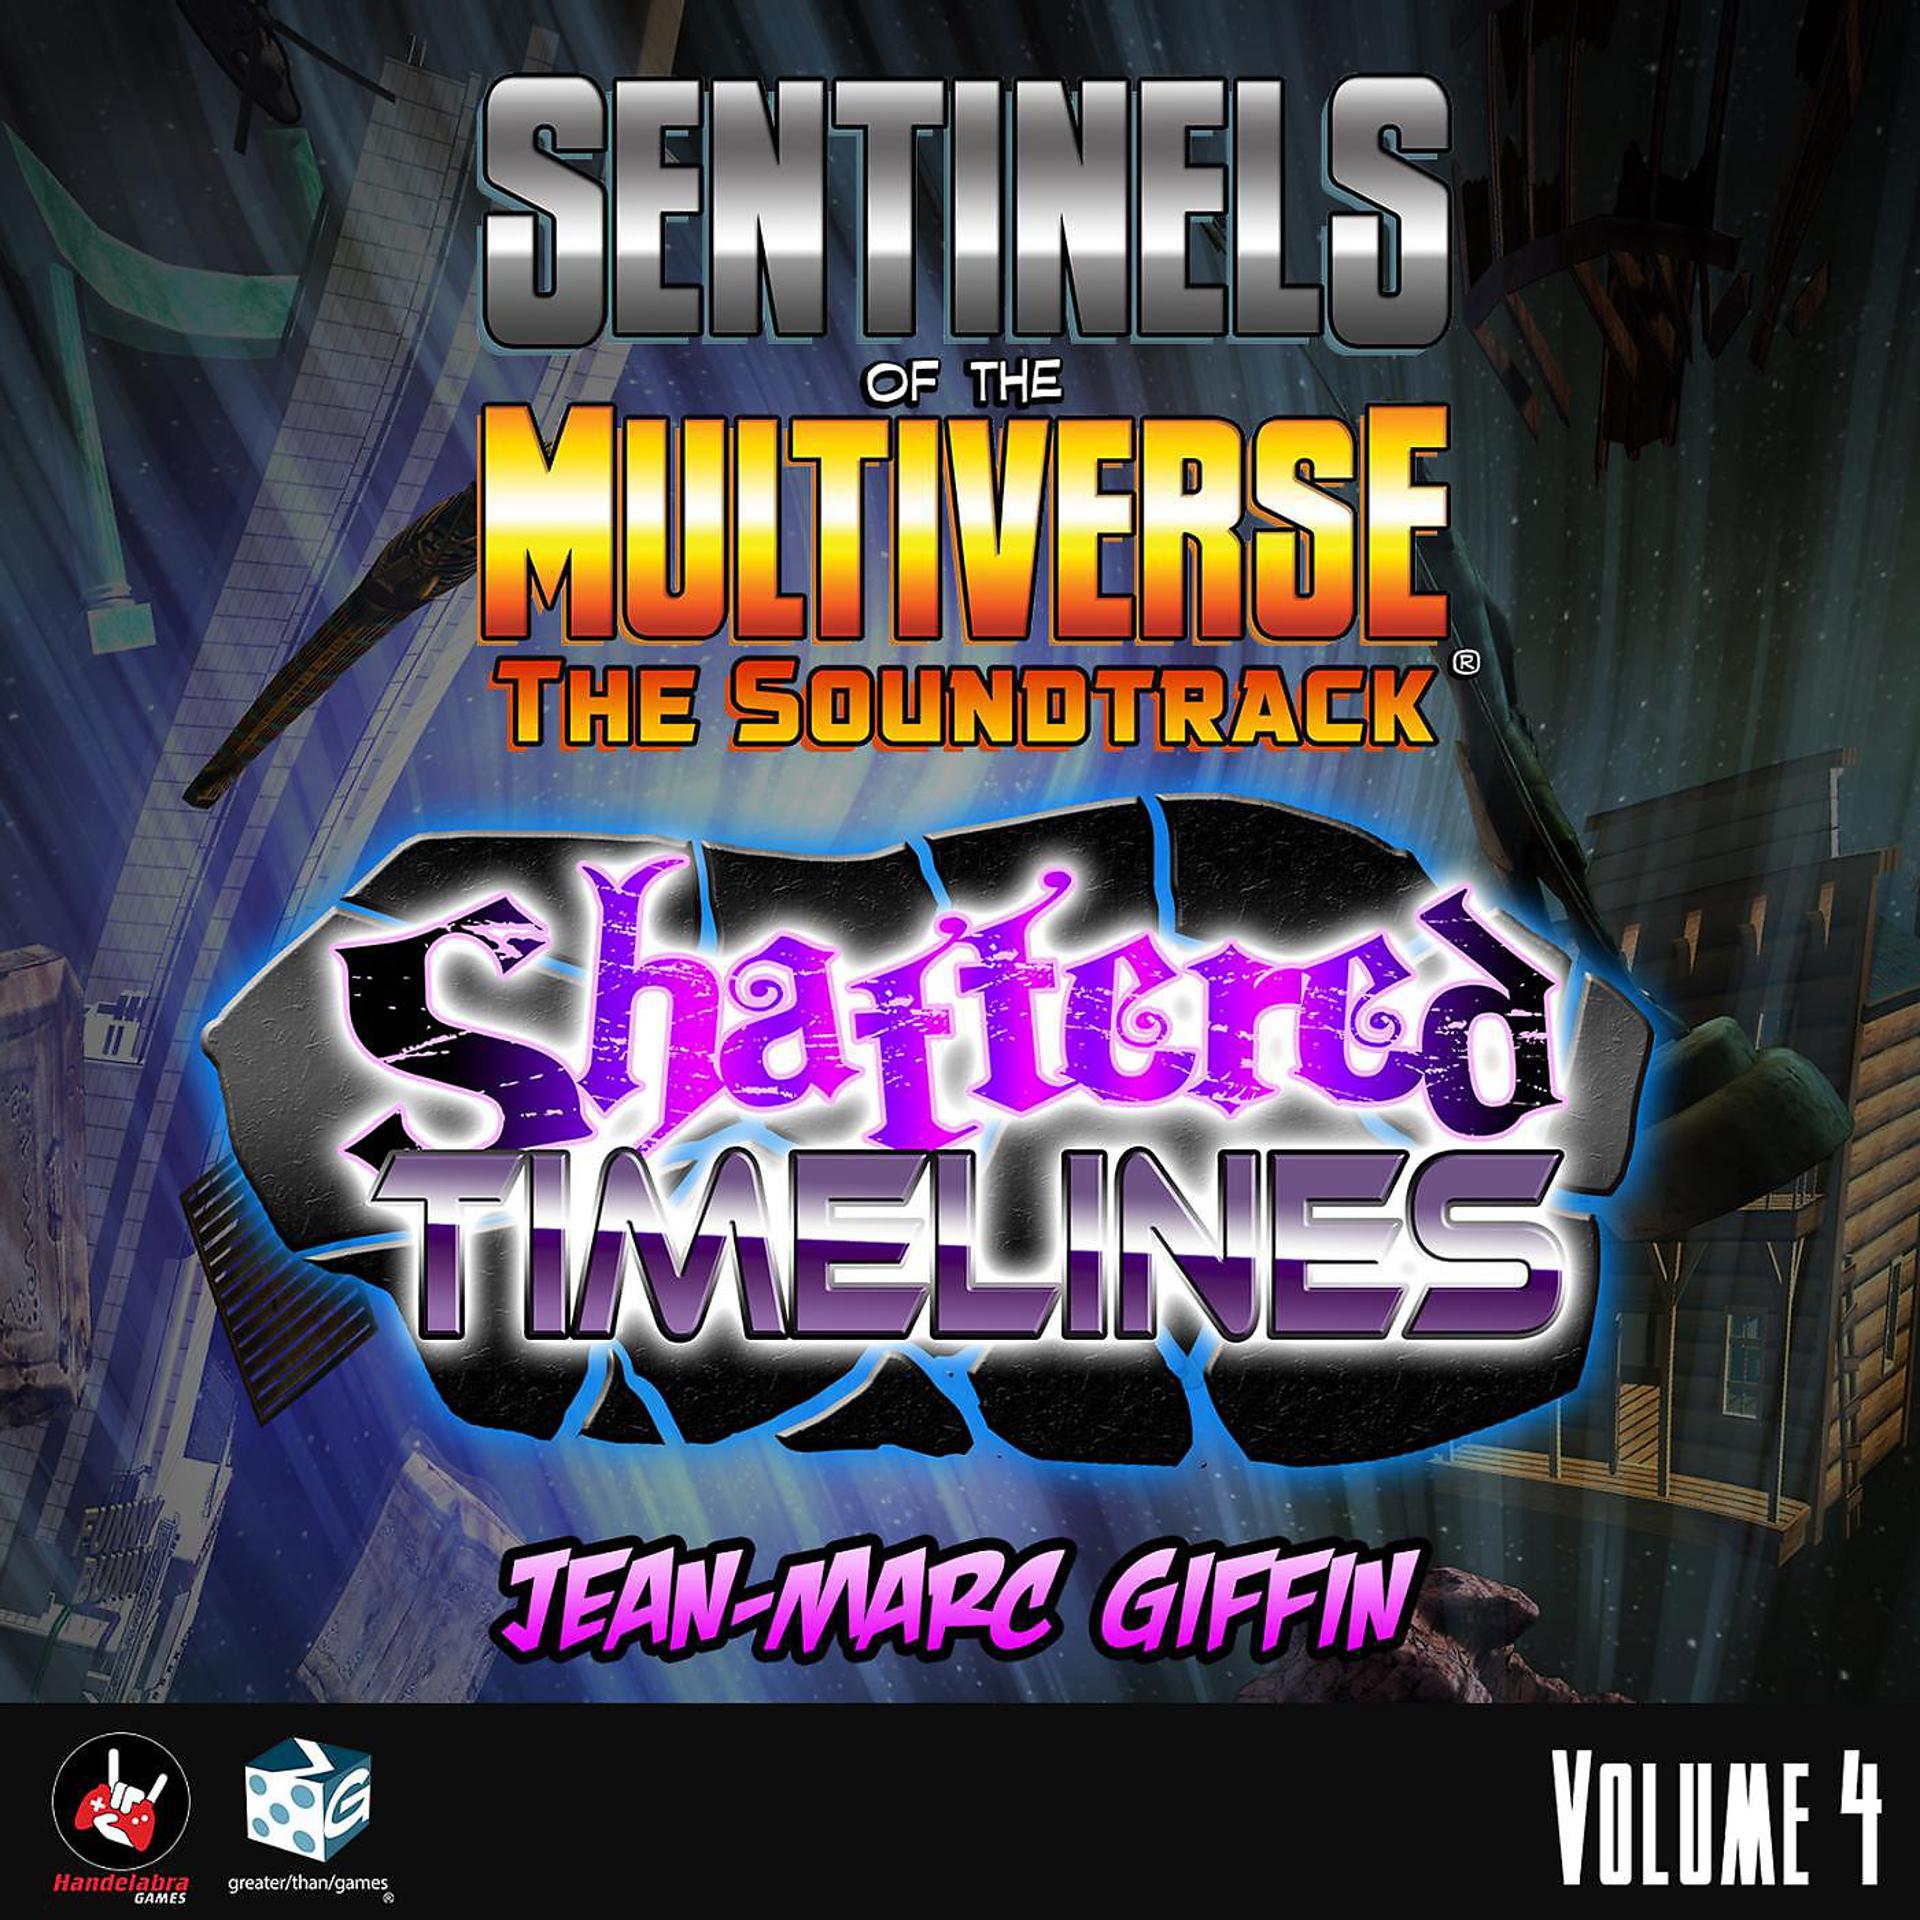 Постер альбома Sentinels of the Multiverse: The Soundtrack, Vol. 4 (Shattered Timelines)